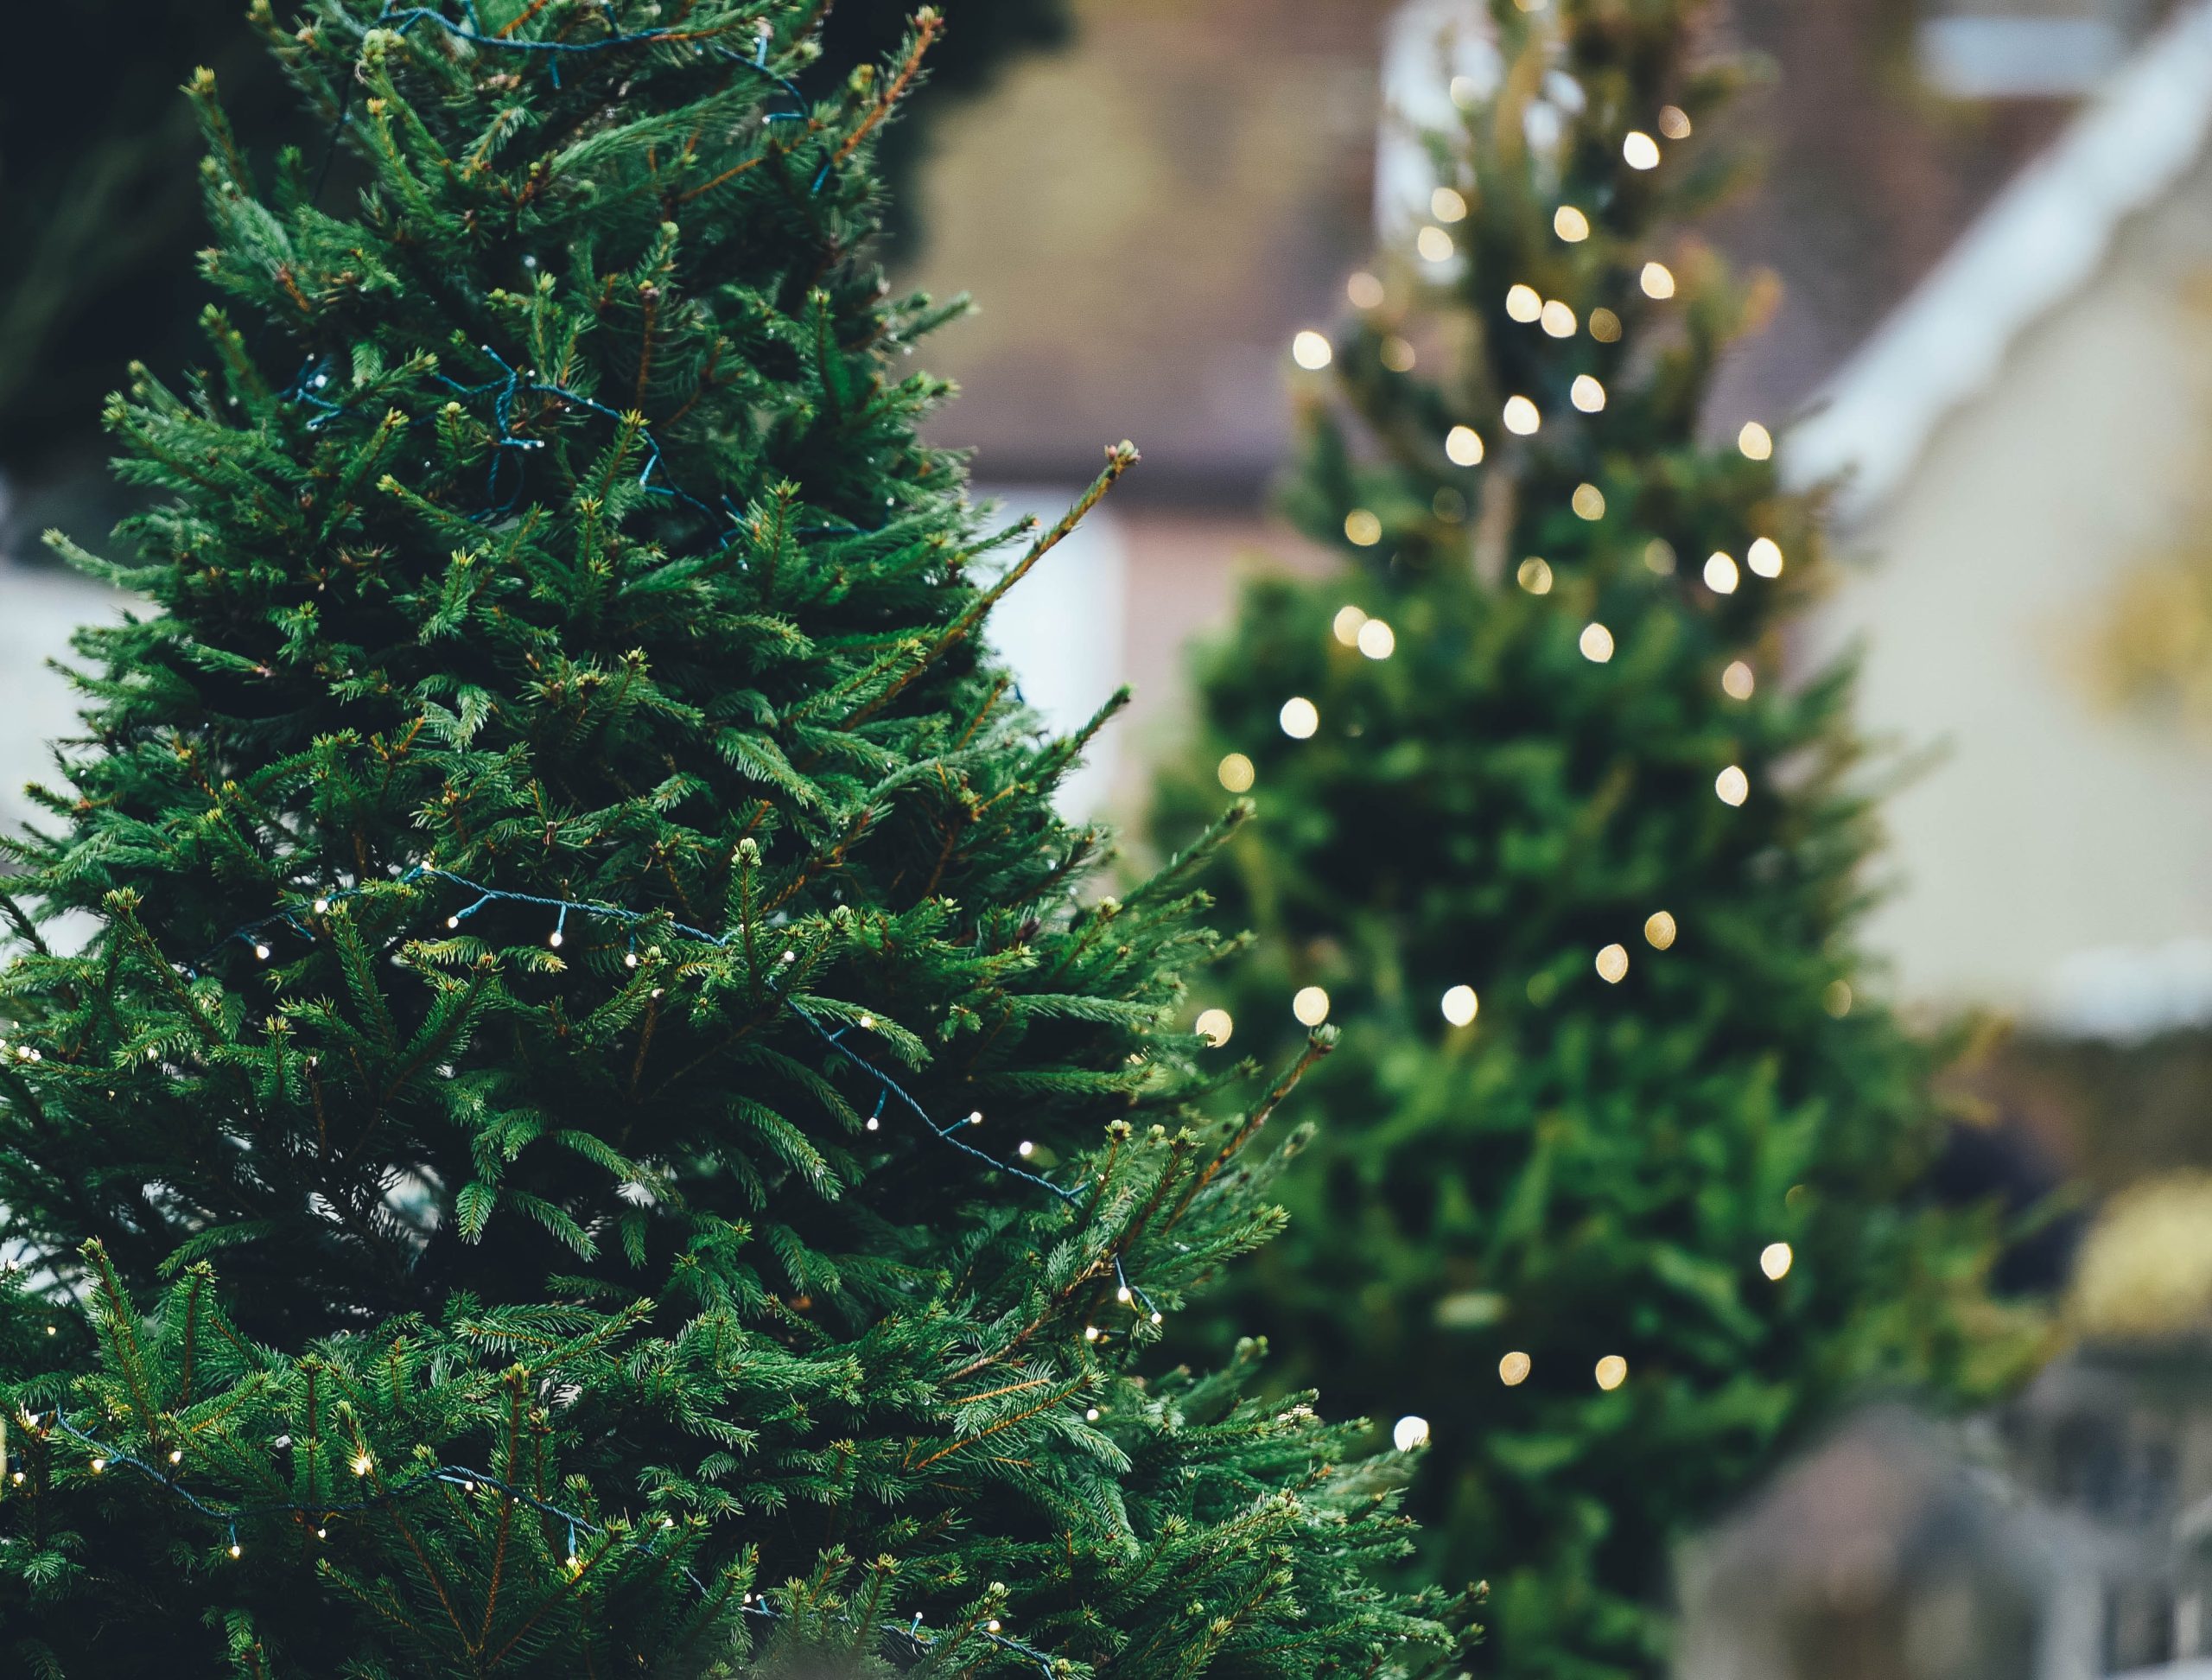 Get lost in the Festival of Christmas Trees wonderland